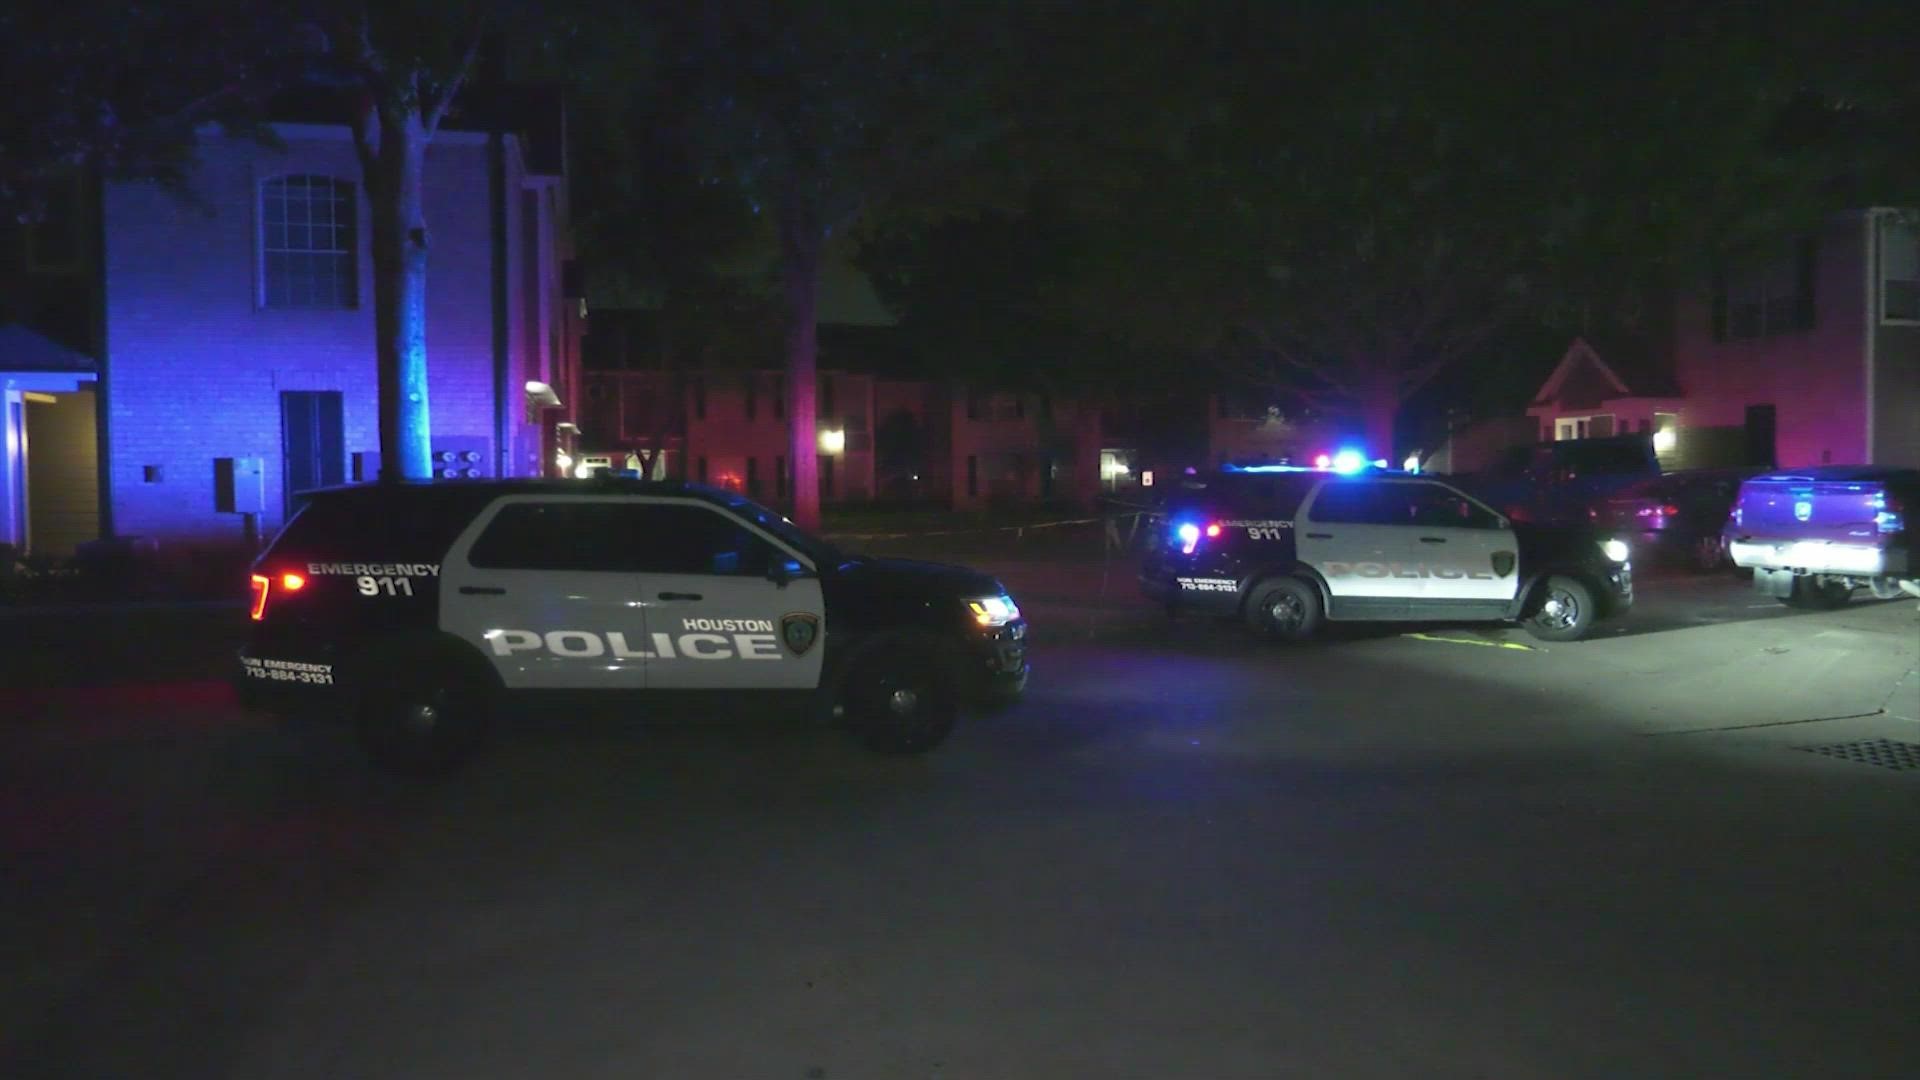 A 1-year-old boy died after he was struck by a car early Monday morning in west Houston, according to police.